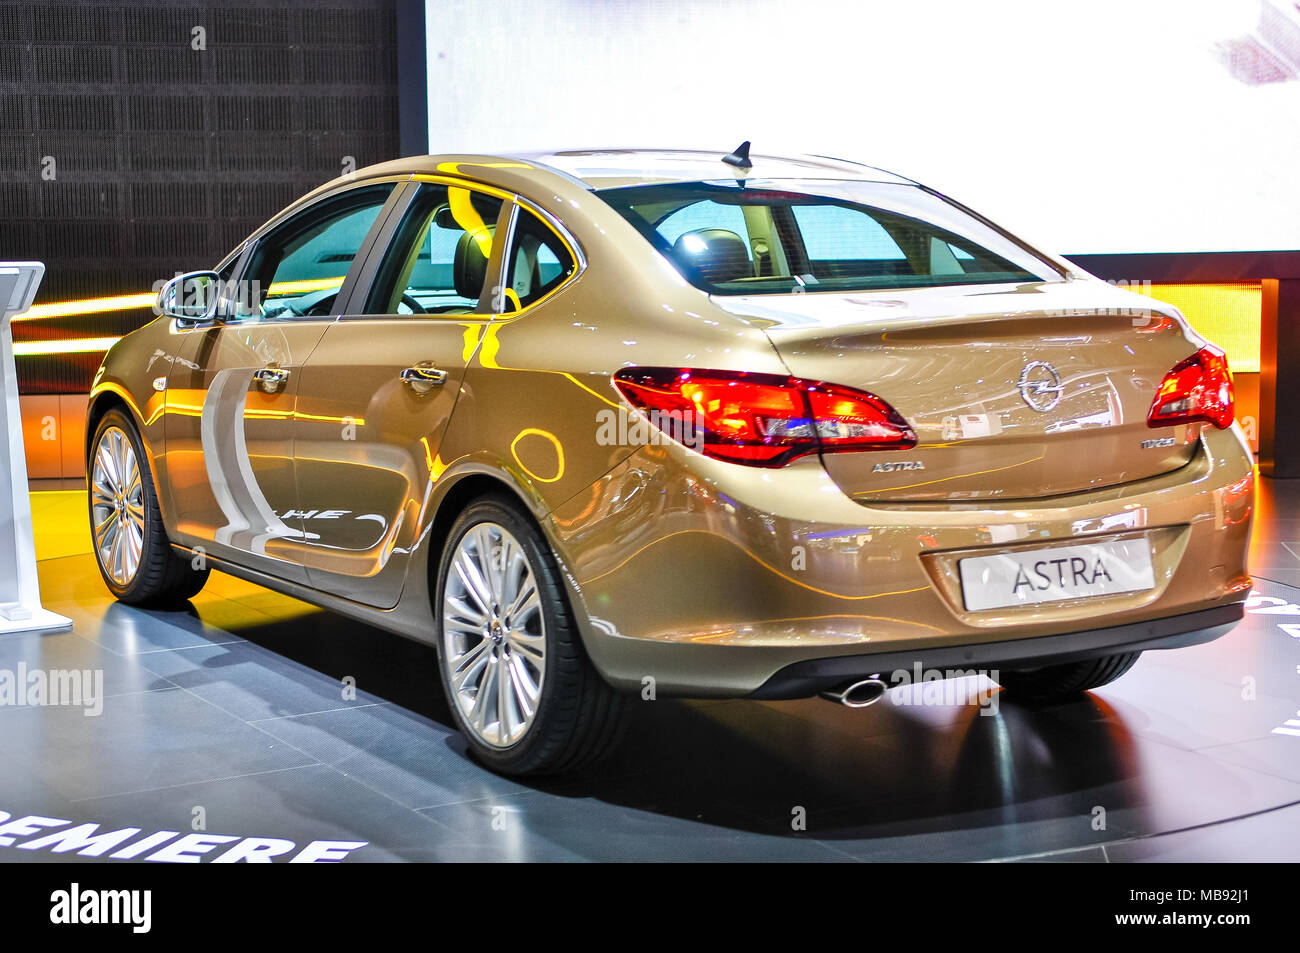 25 Years Ago: Launch of the Opel Astra G, Opel